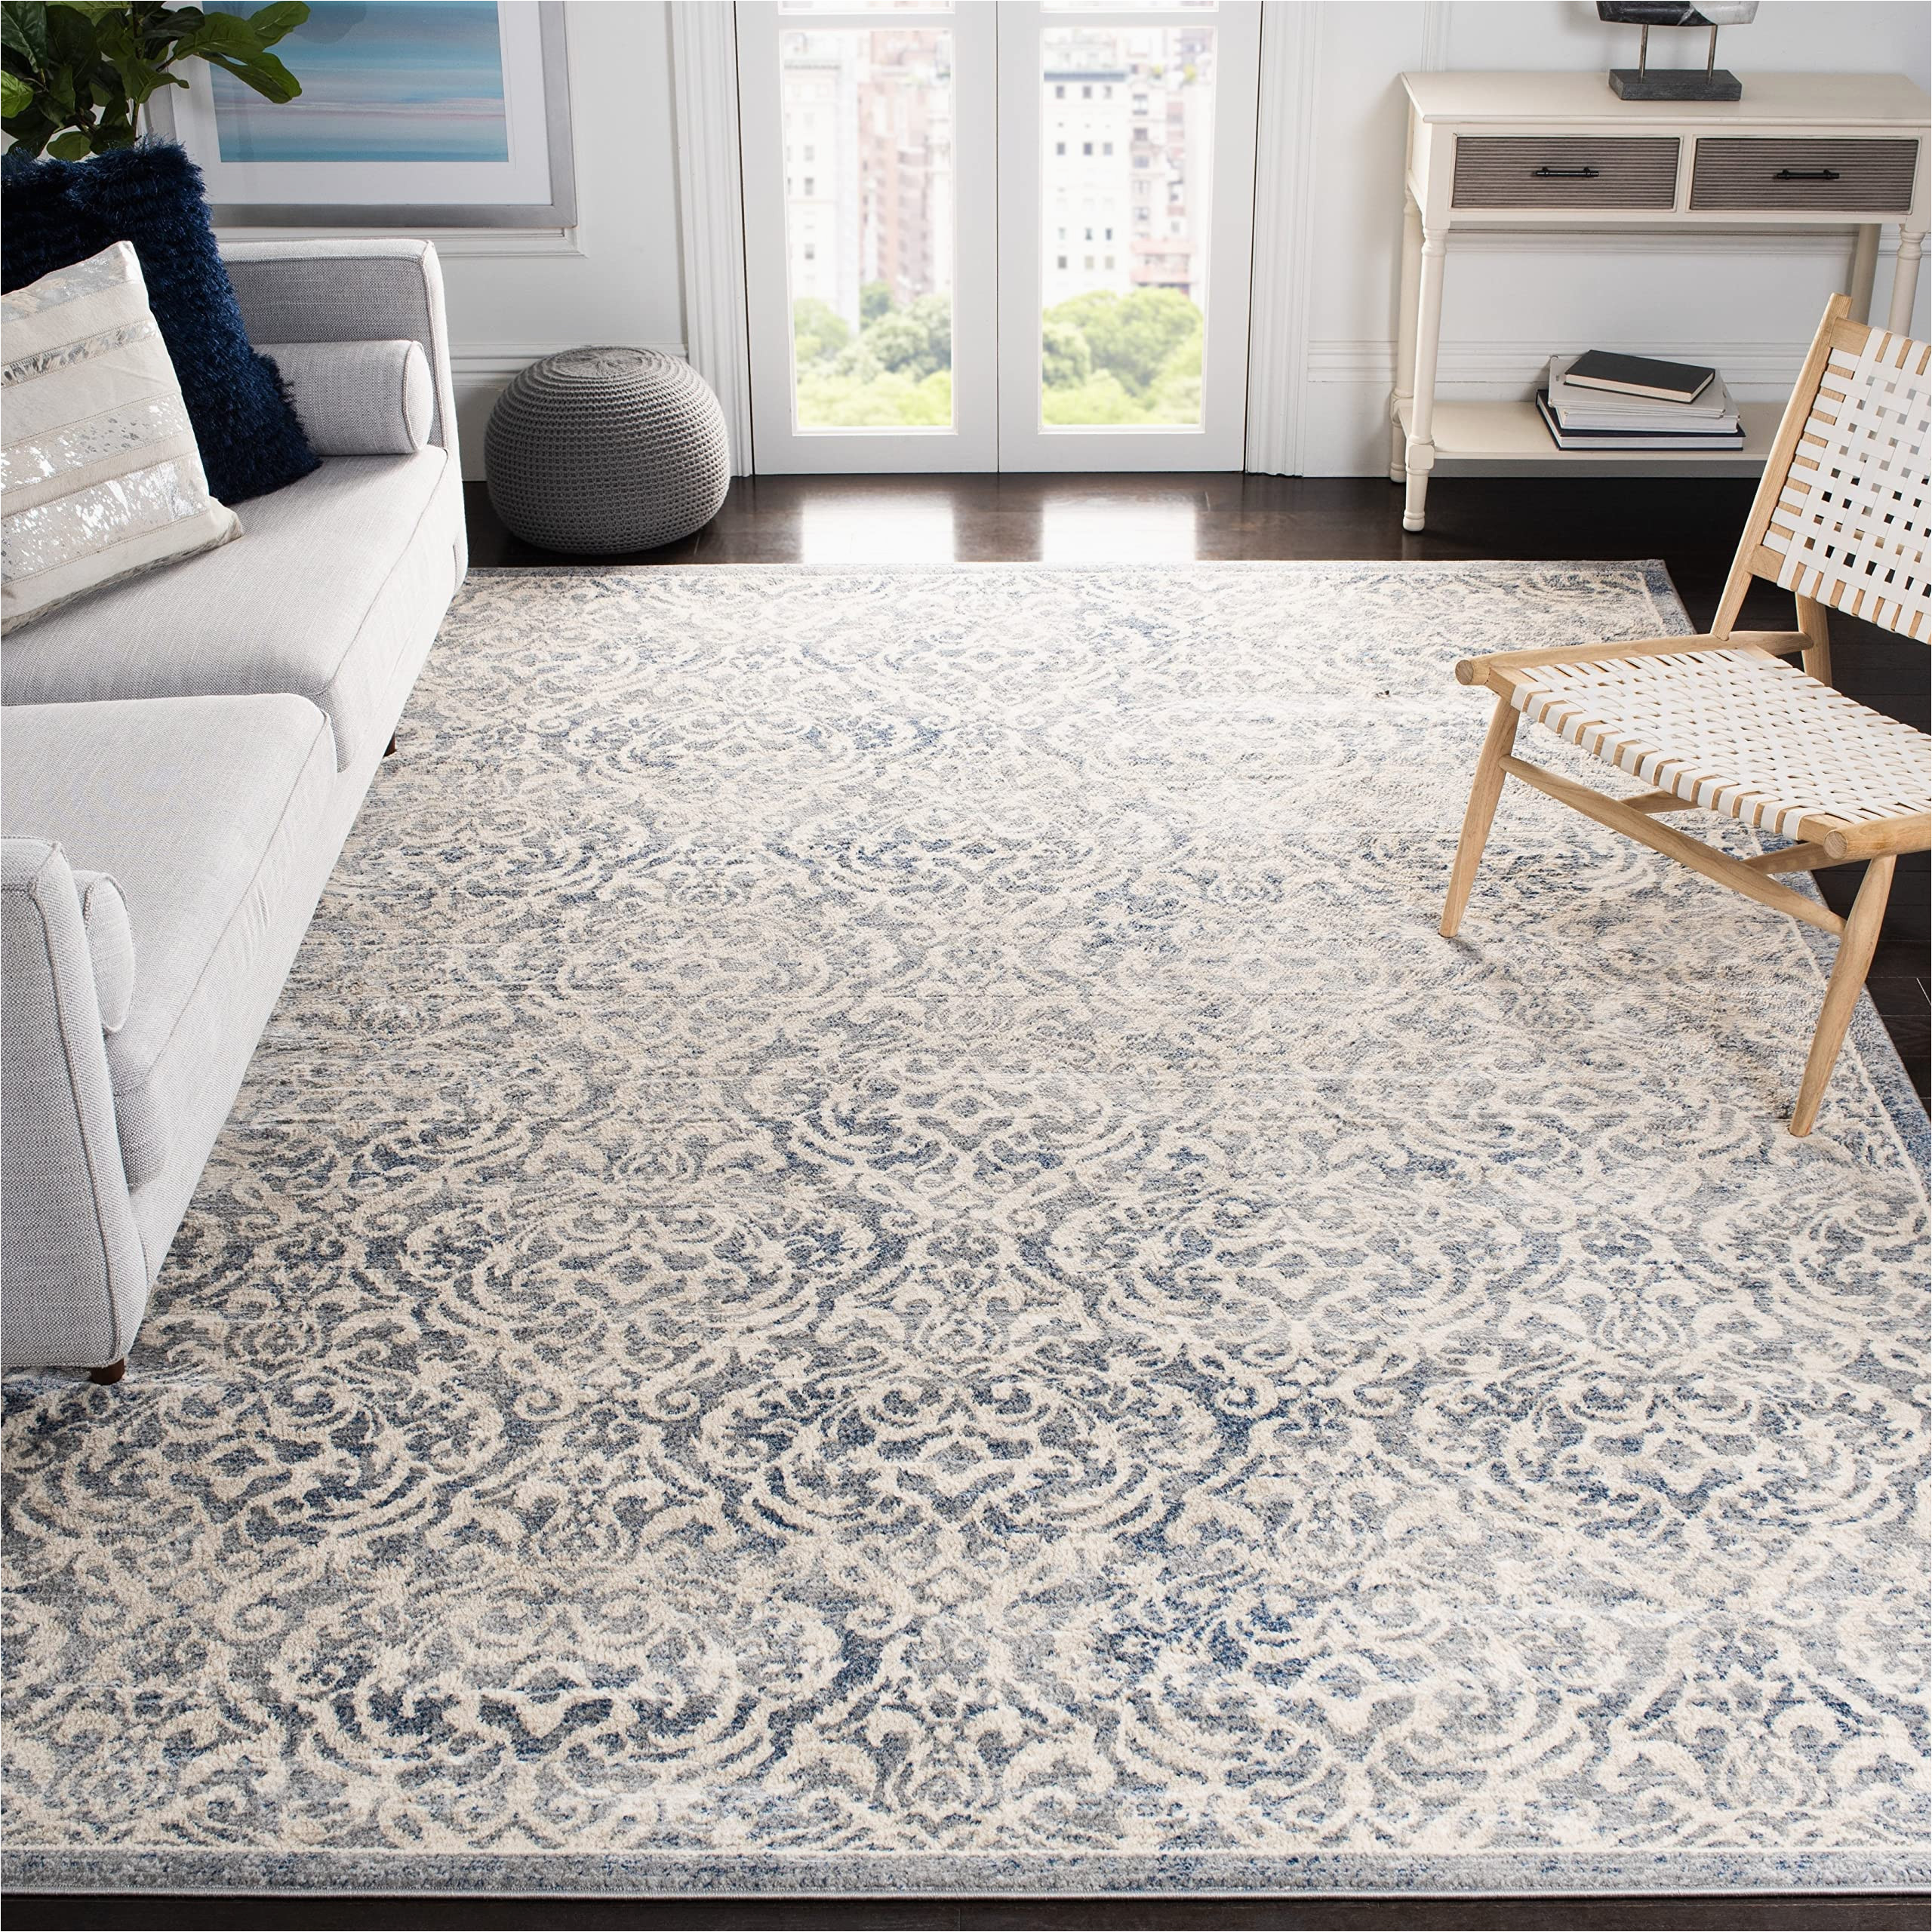 Macy S area Rugs 10×13 Amazon.com: Safavieh Brentwood Collection 10′ X 13′ Light Grey …